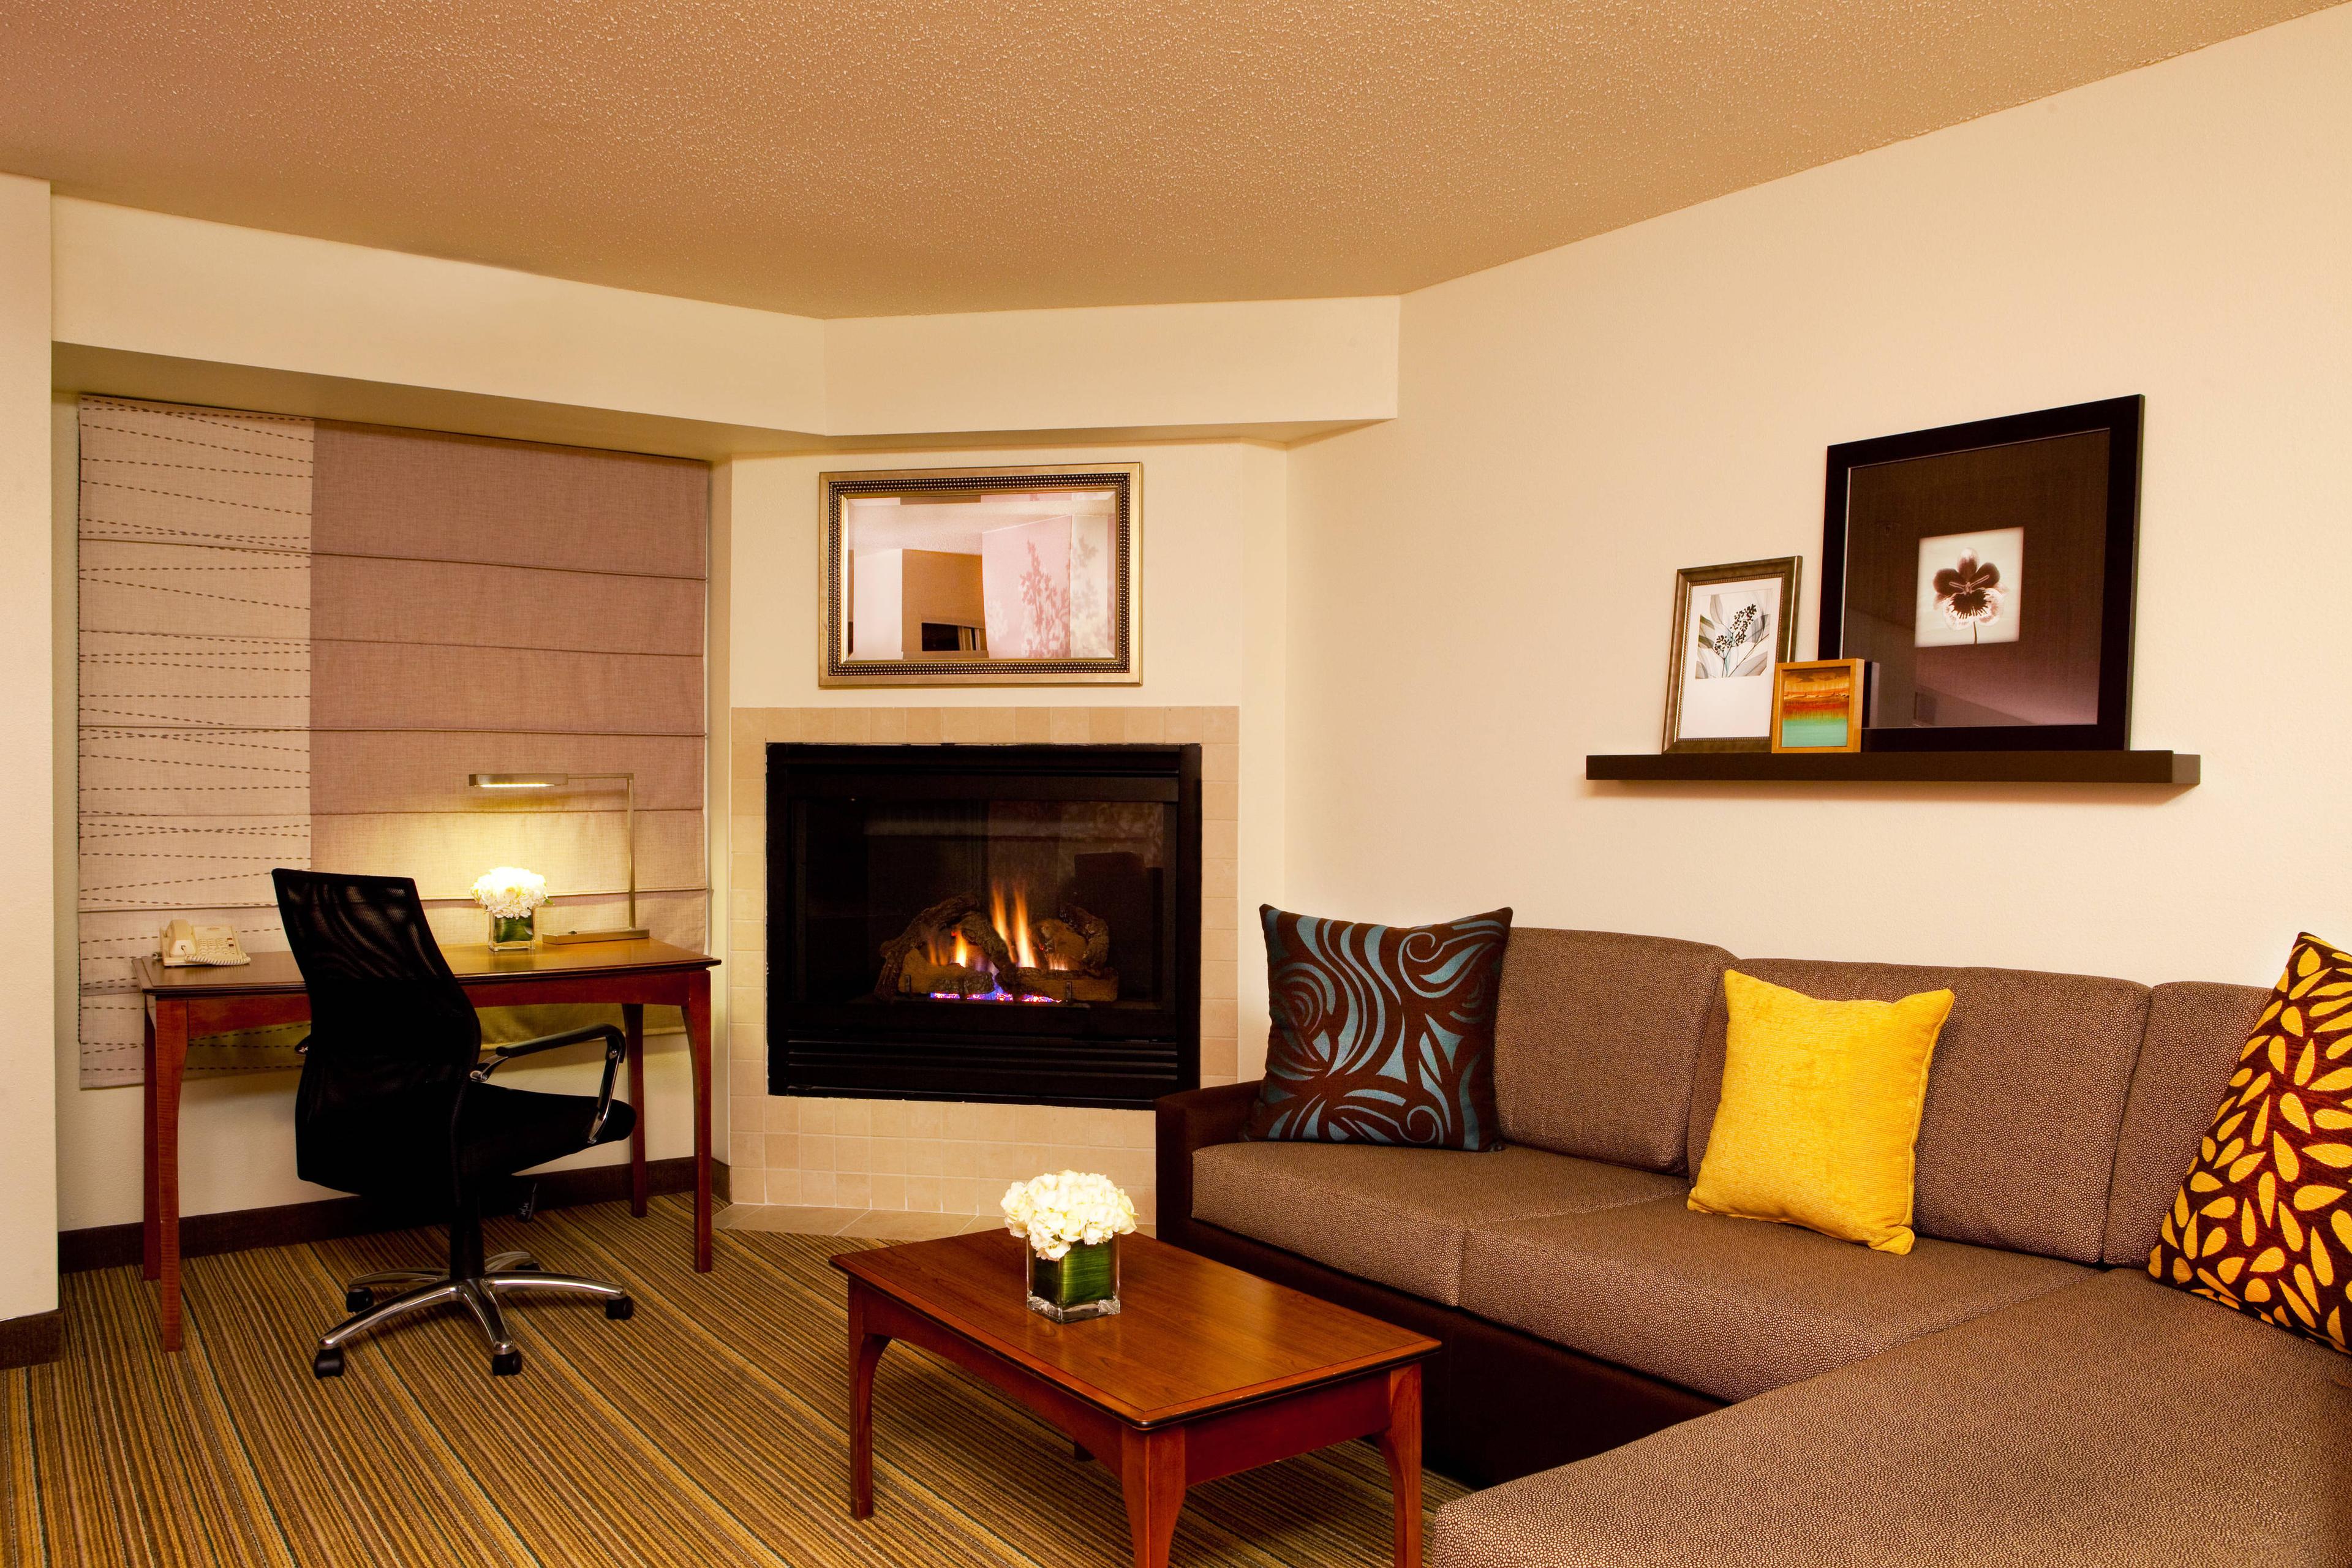 Our Greenbelt hotel's Studio Suites feature a spacious living area, and some have a cozy fireplace.